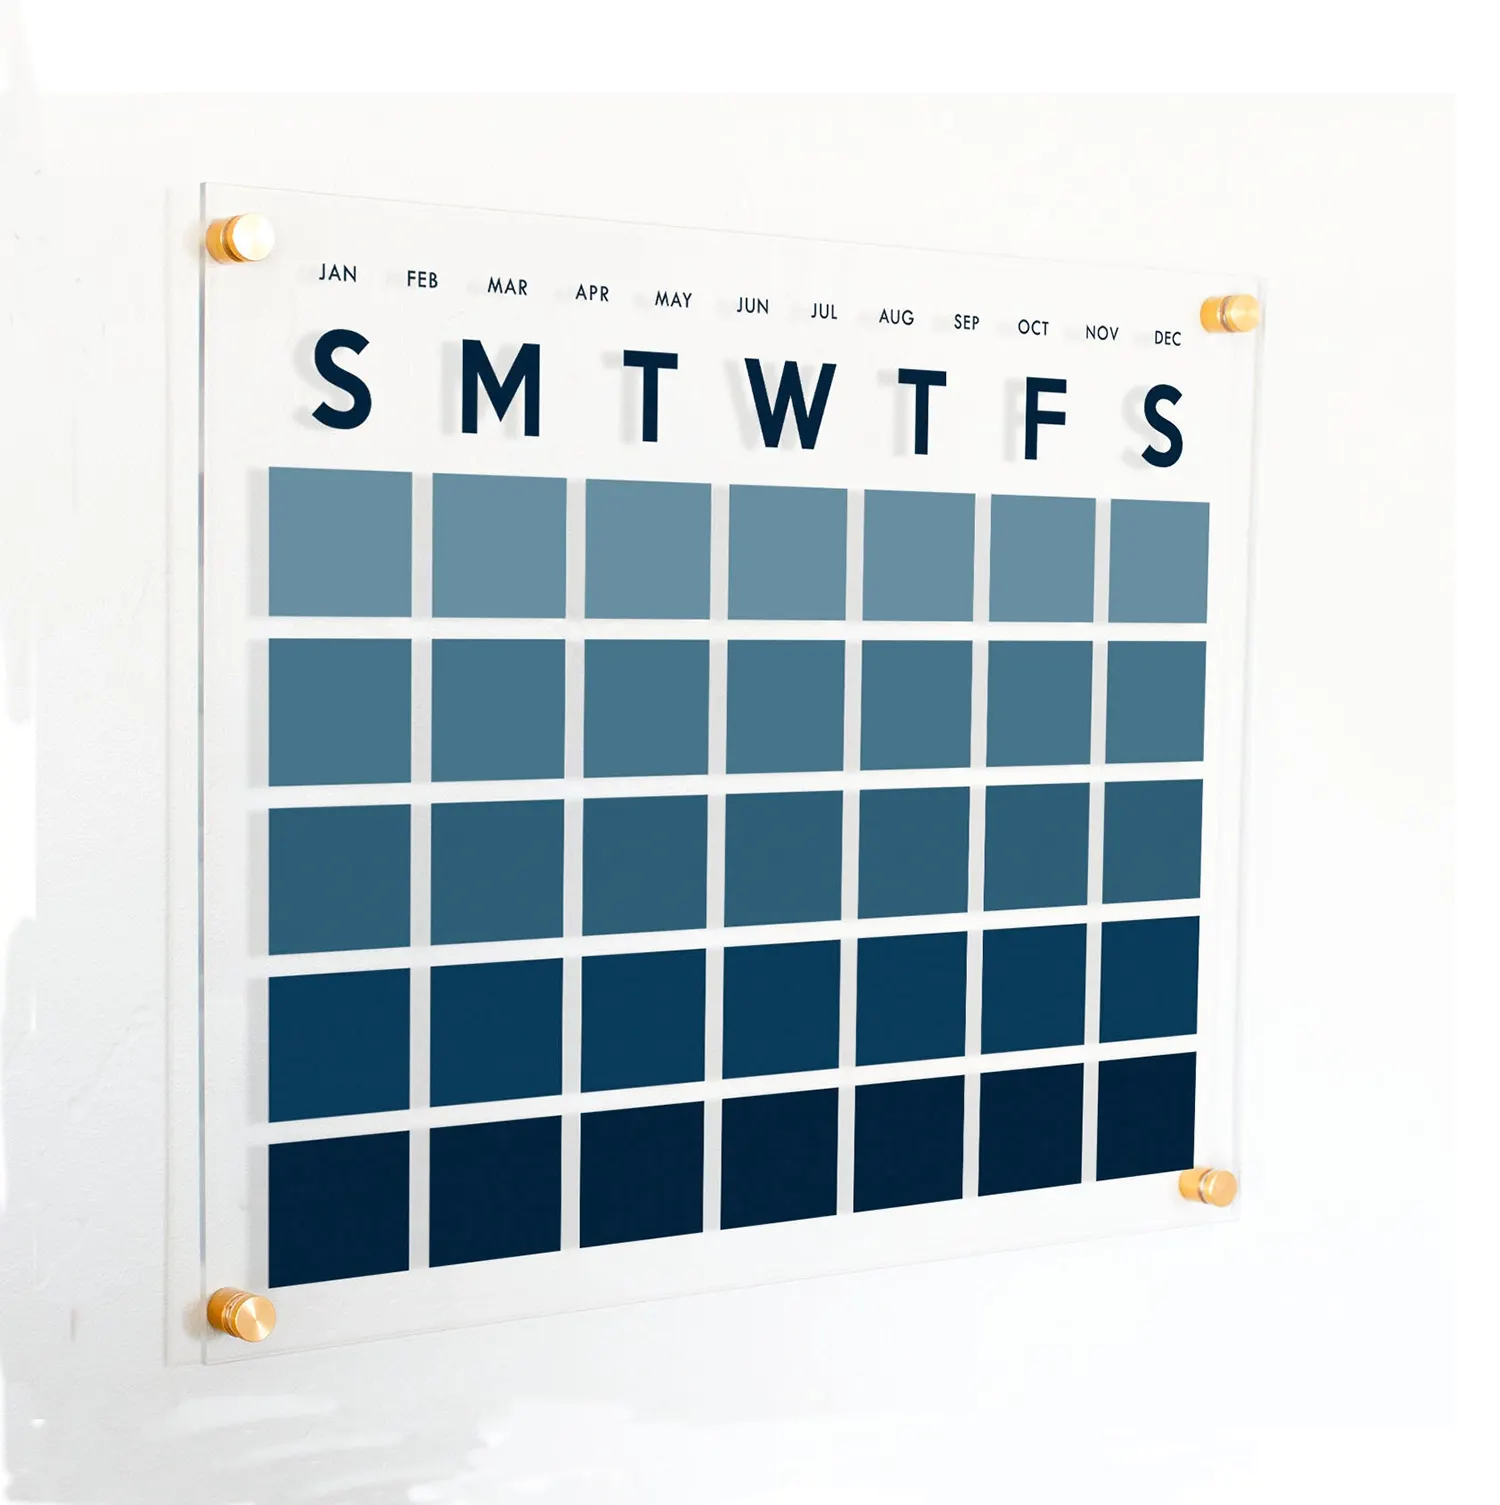 View larger image Add to Compare Share Hot Sale Custom Wall Mounted Dry Erase Calendar Clear Acrylic Floating Calendar With